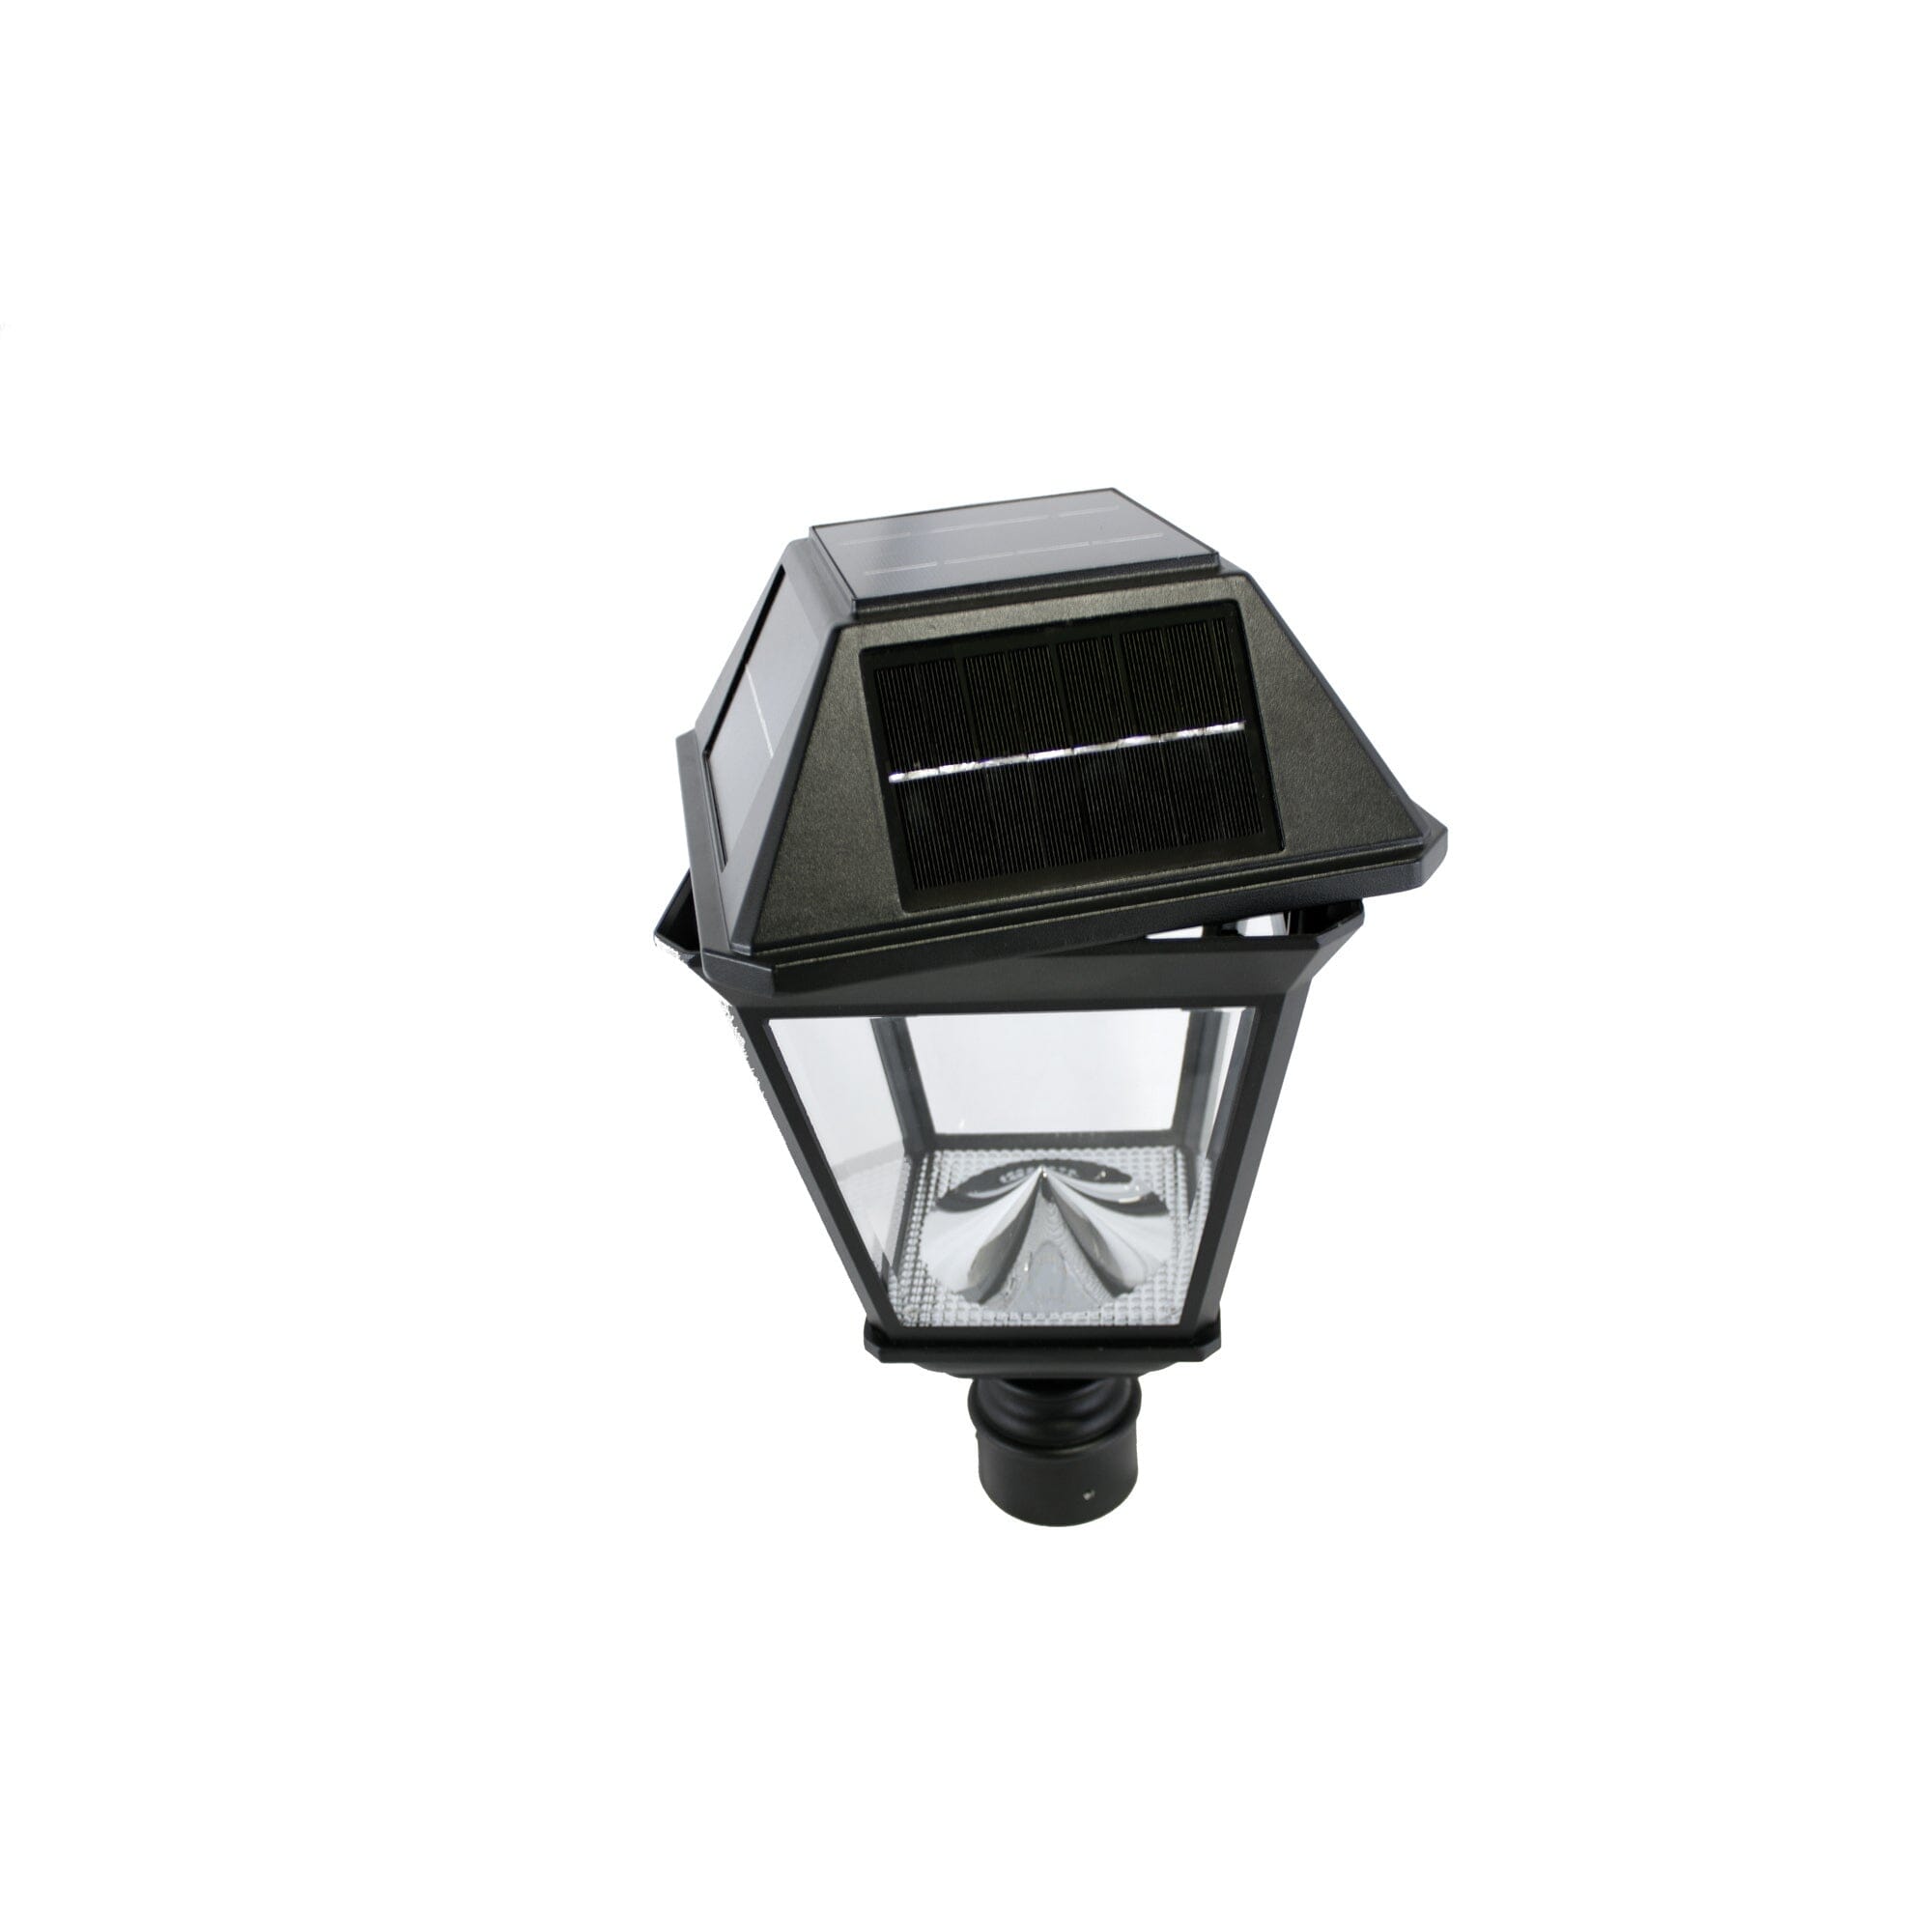 Imperial III Solar Lamp | Bright & Warm White in One